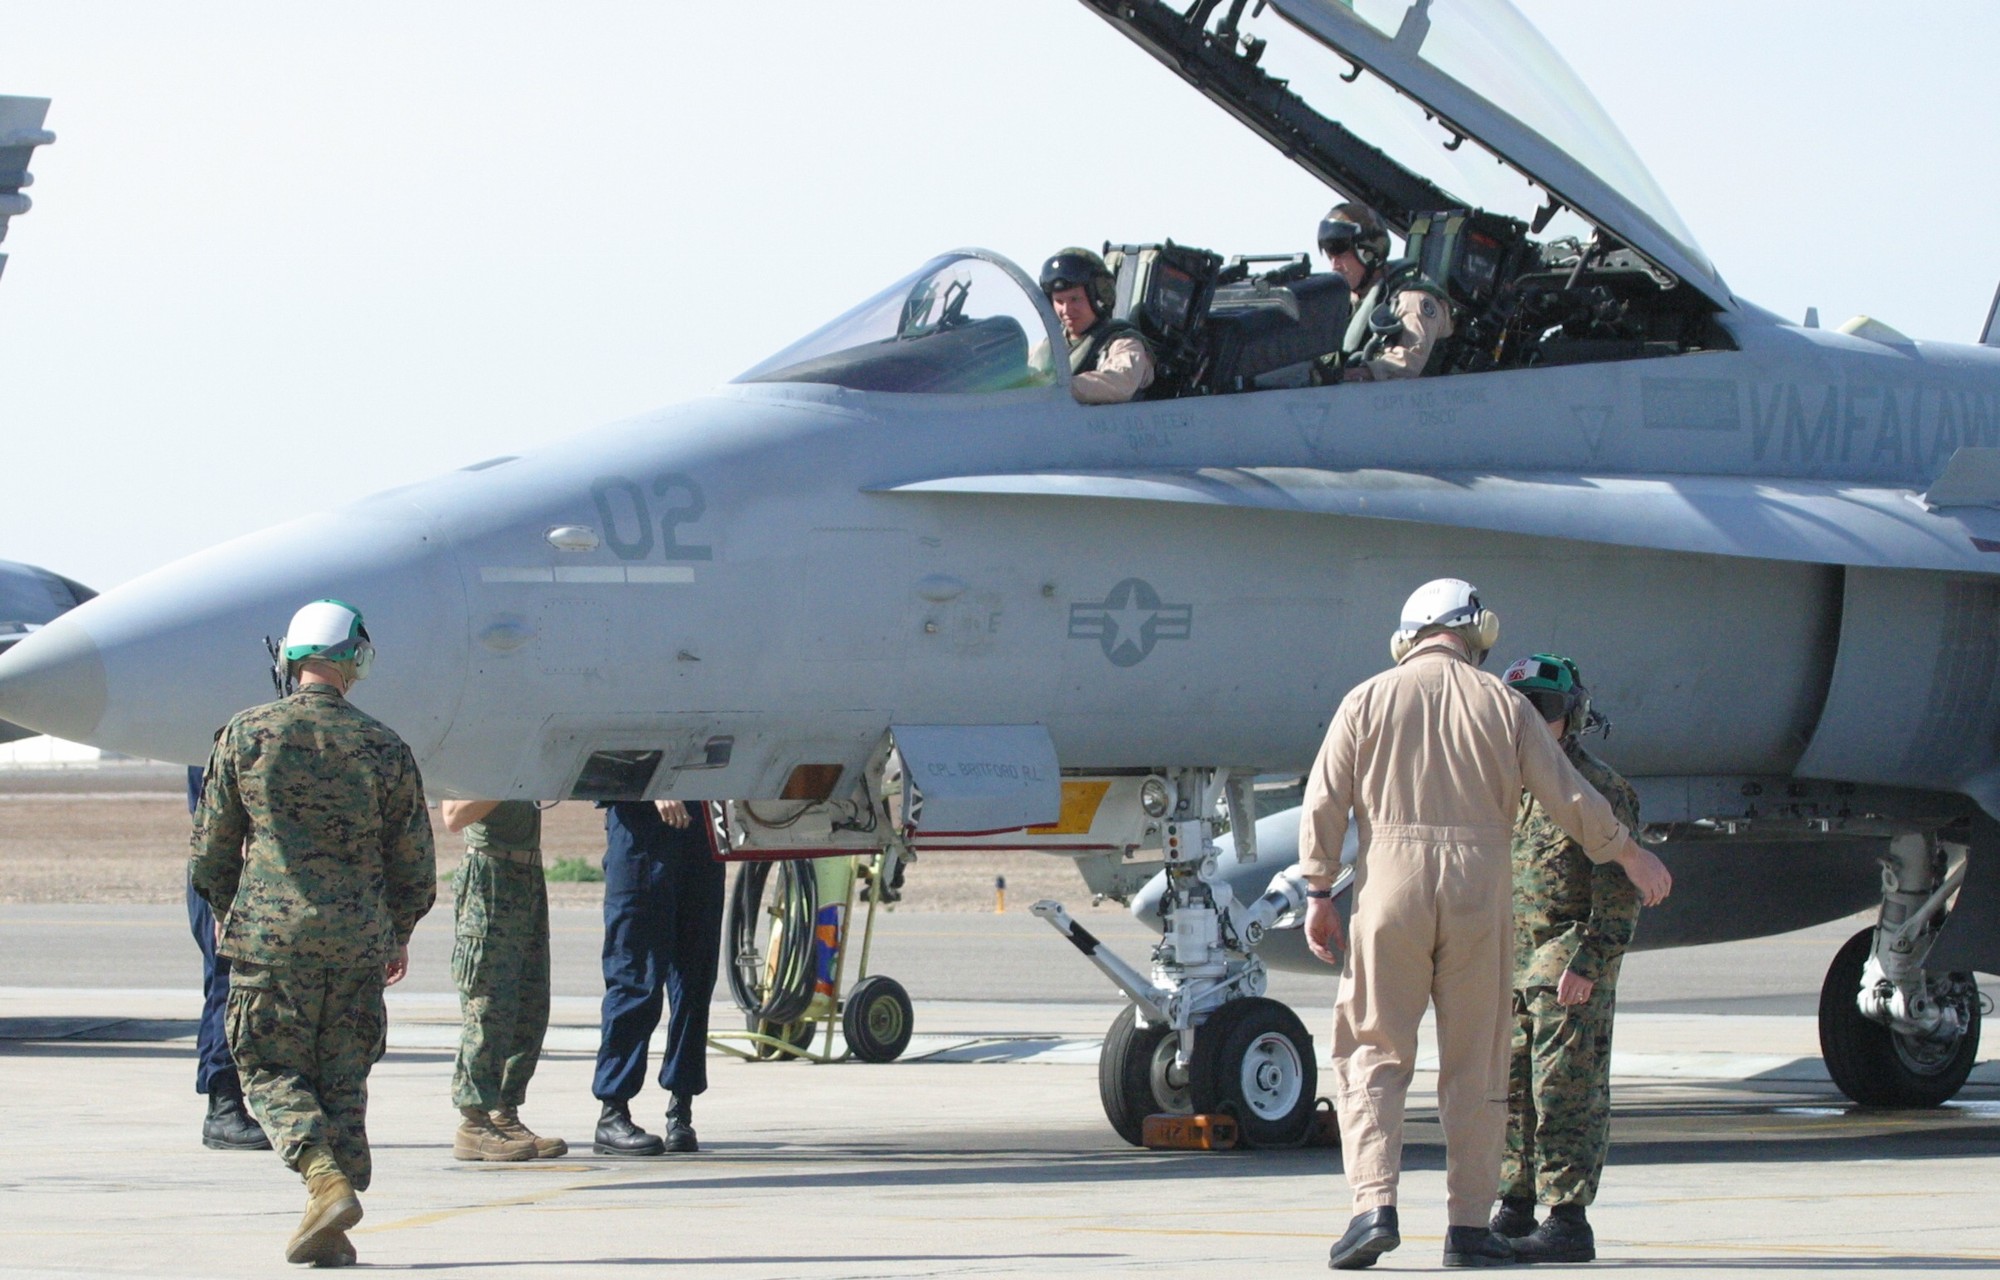 vmfa(aw)-332 moonlighters marine fighter attack squadron all-weather f/a-18d hornet 18 atars system